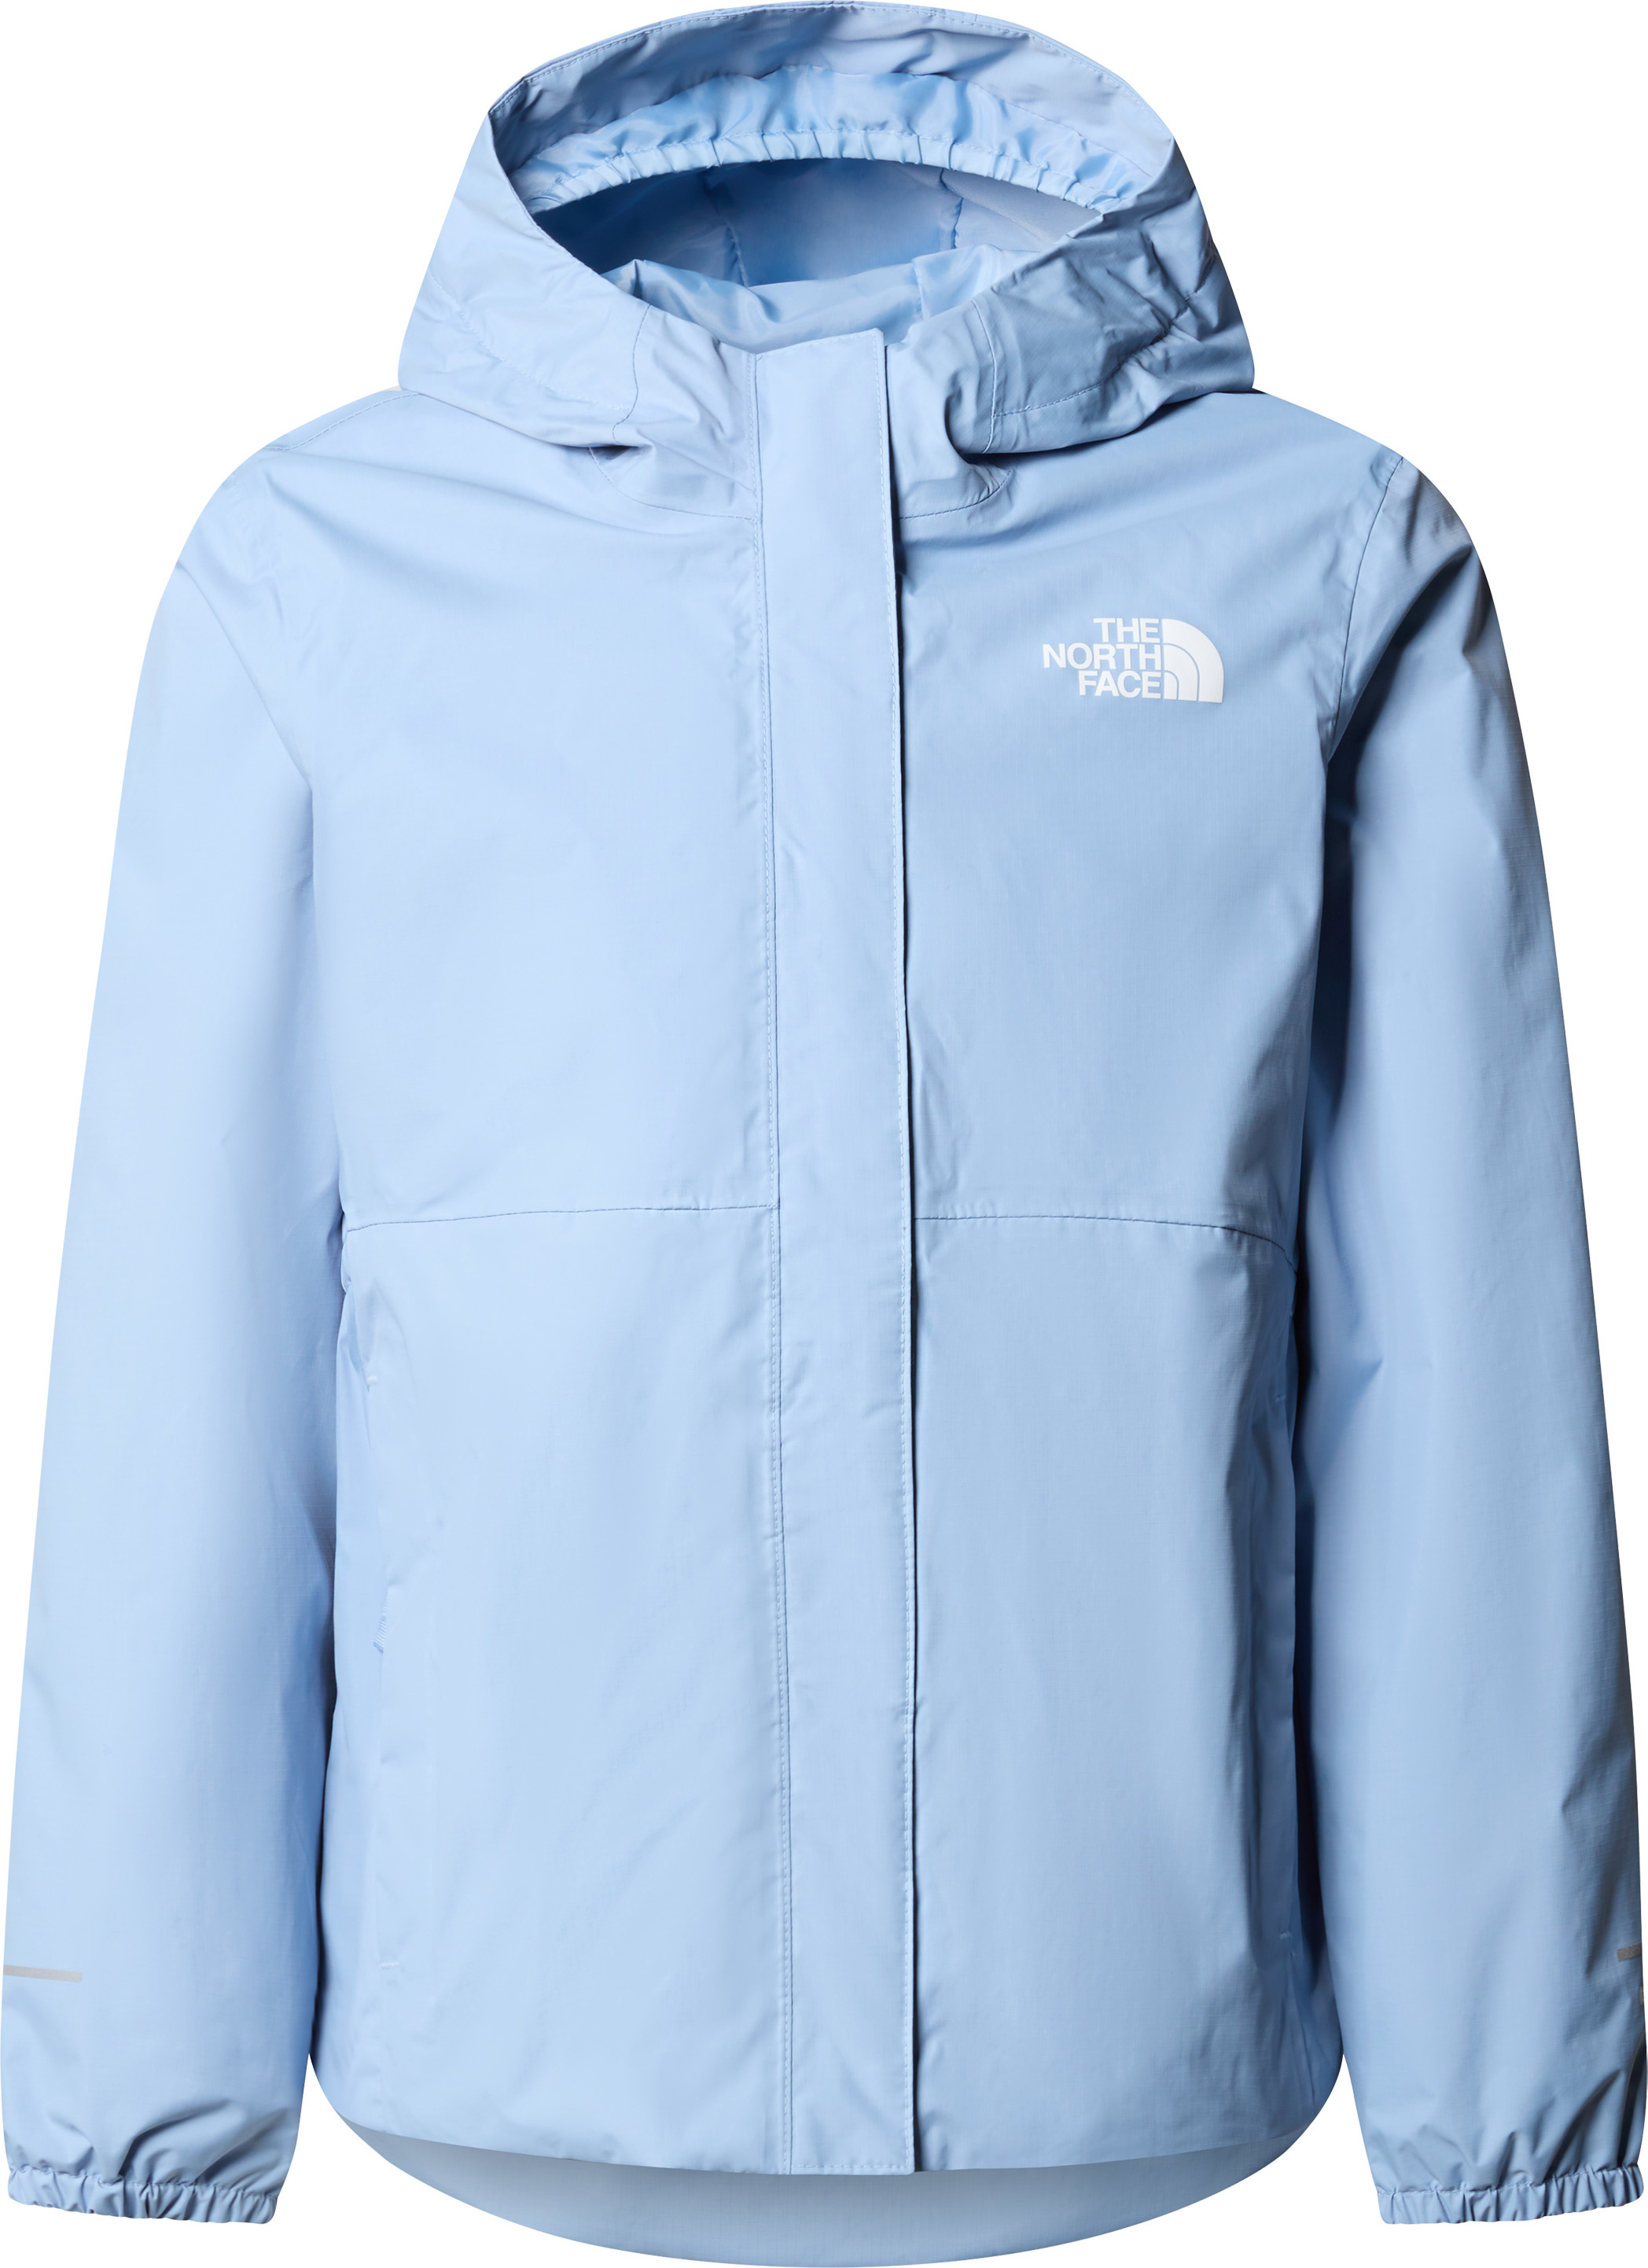 The North Face The North Face G Antora Rain Jacket Steel Blue XS, Steel Blue